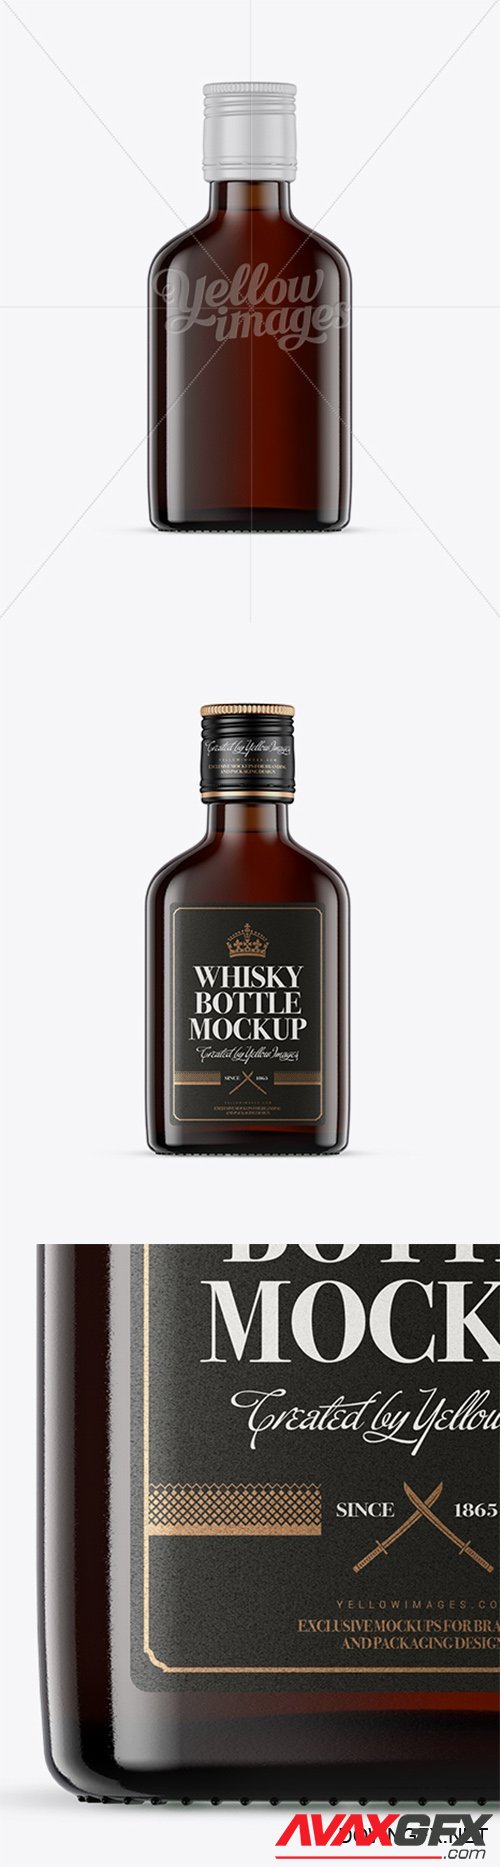 Amber Glass Whiskey Bottle Mockup - Front View 14488 TIF